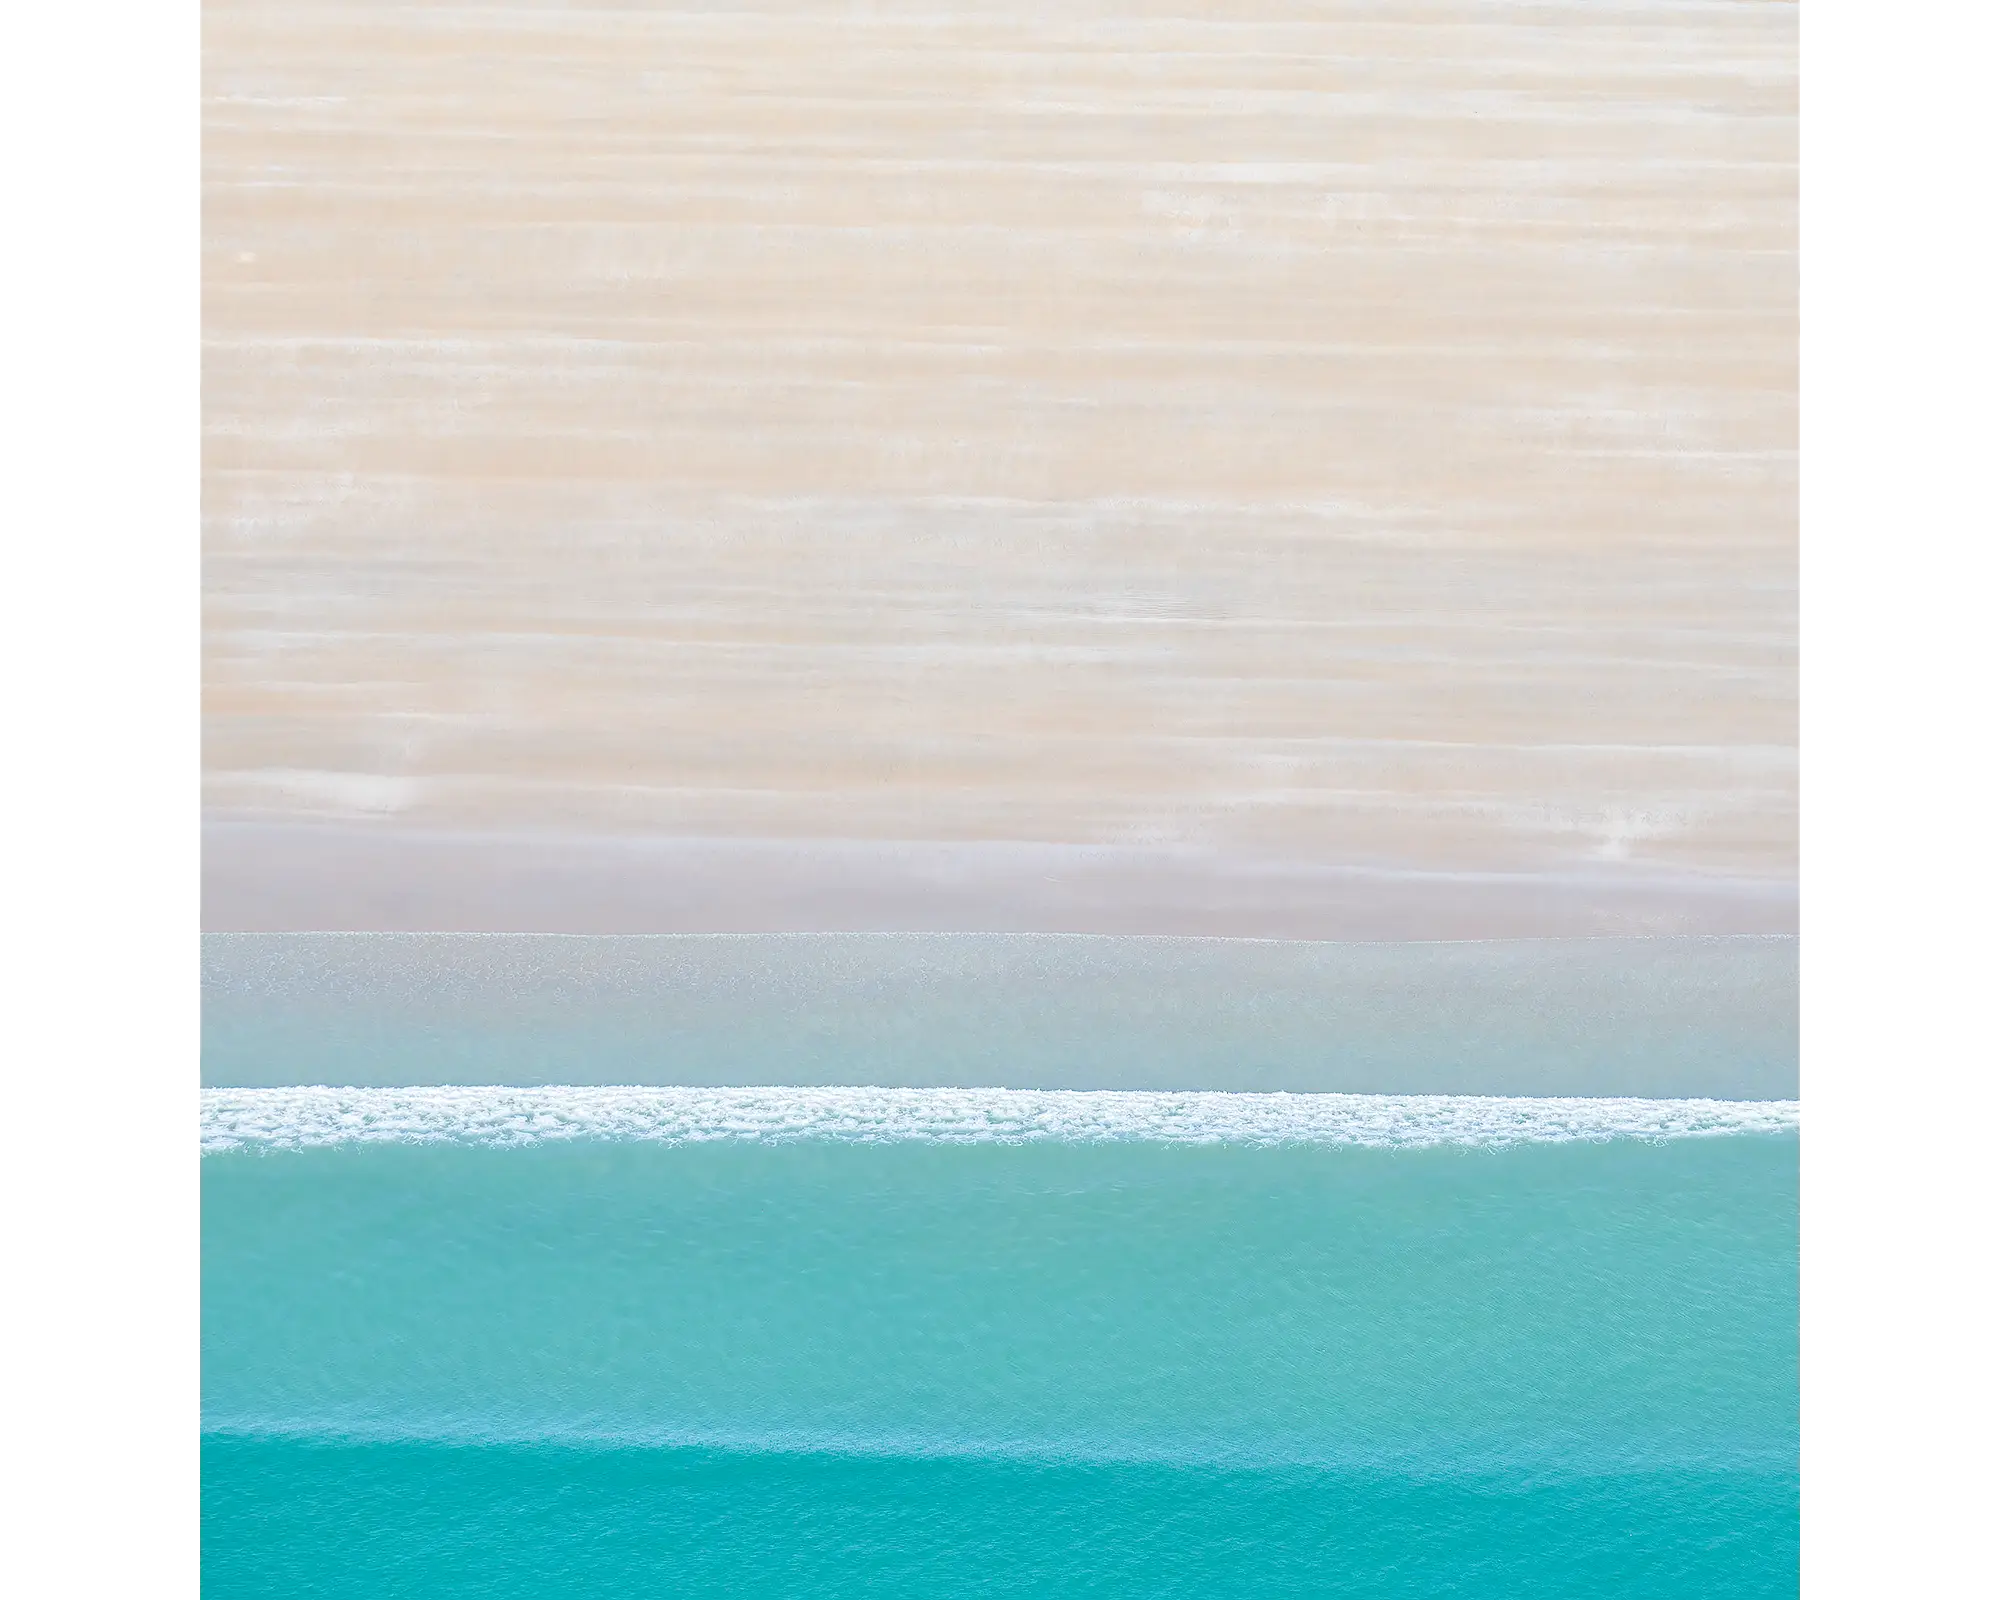 Aerial view of water and sand, Cable Beach, Broome, Western Australia.